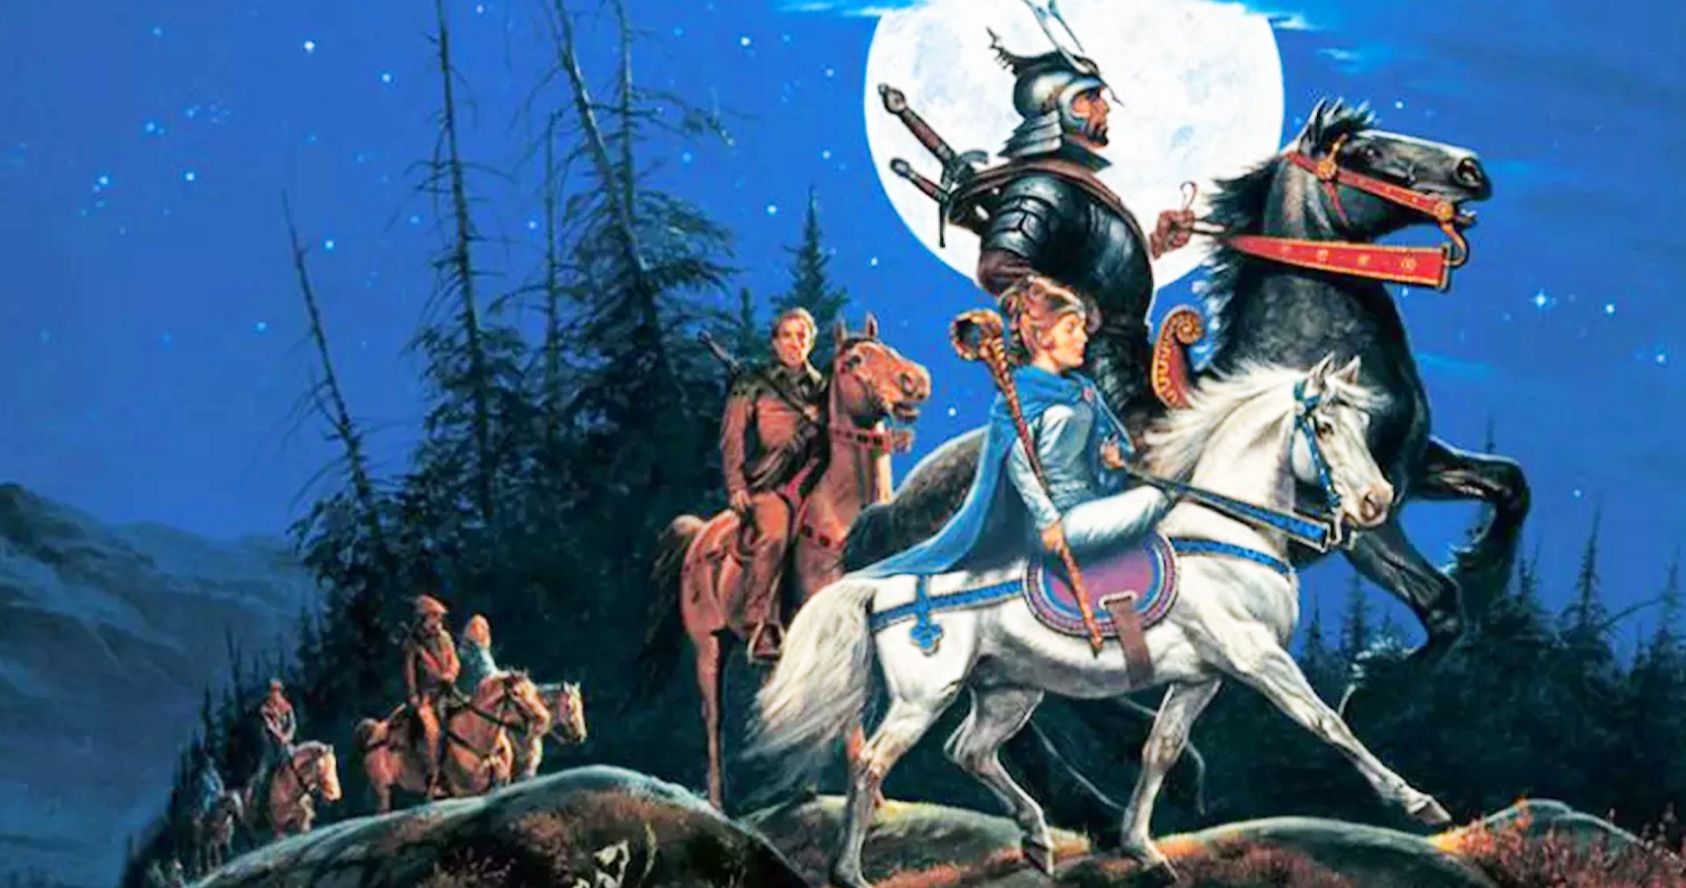 How The Wheel of Time Is Recreating Its Epic Novels for Amazon Prime